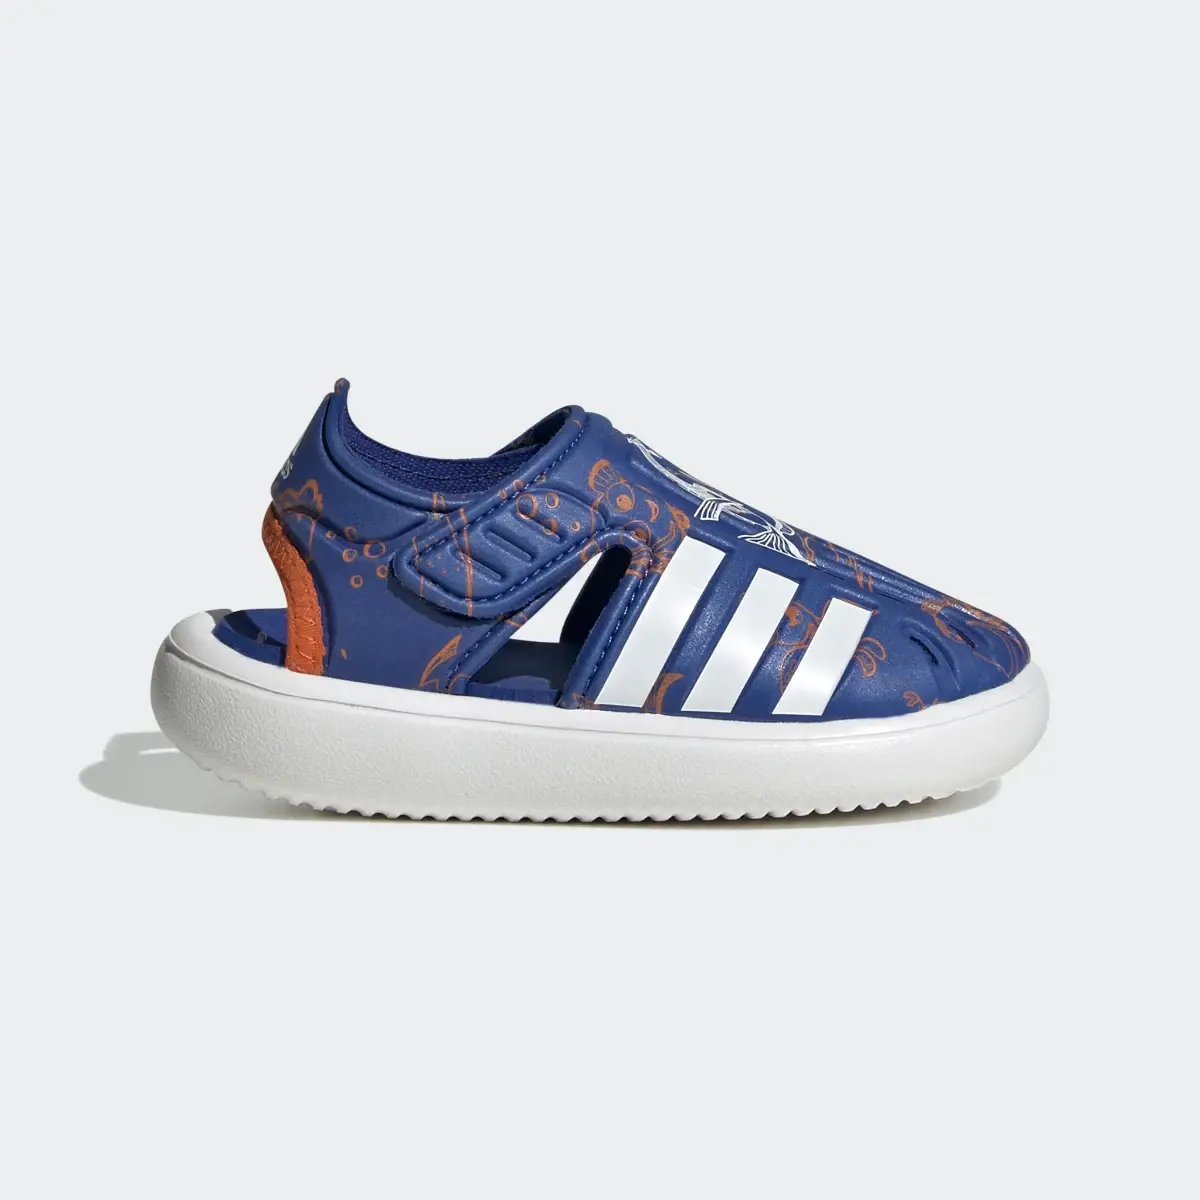 Adidas Sandali Finding Nemo and Dory Closed Toe Summer Water. 2